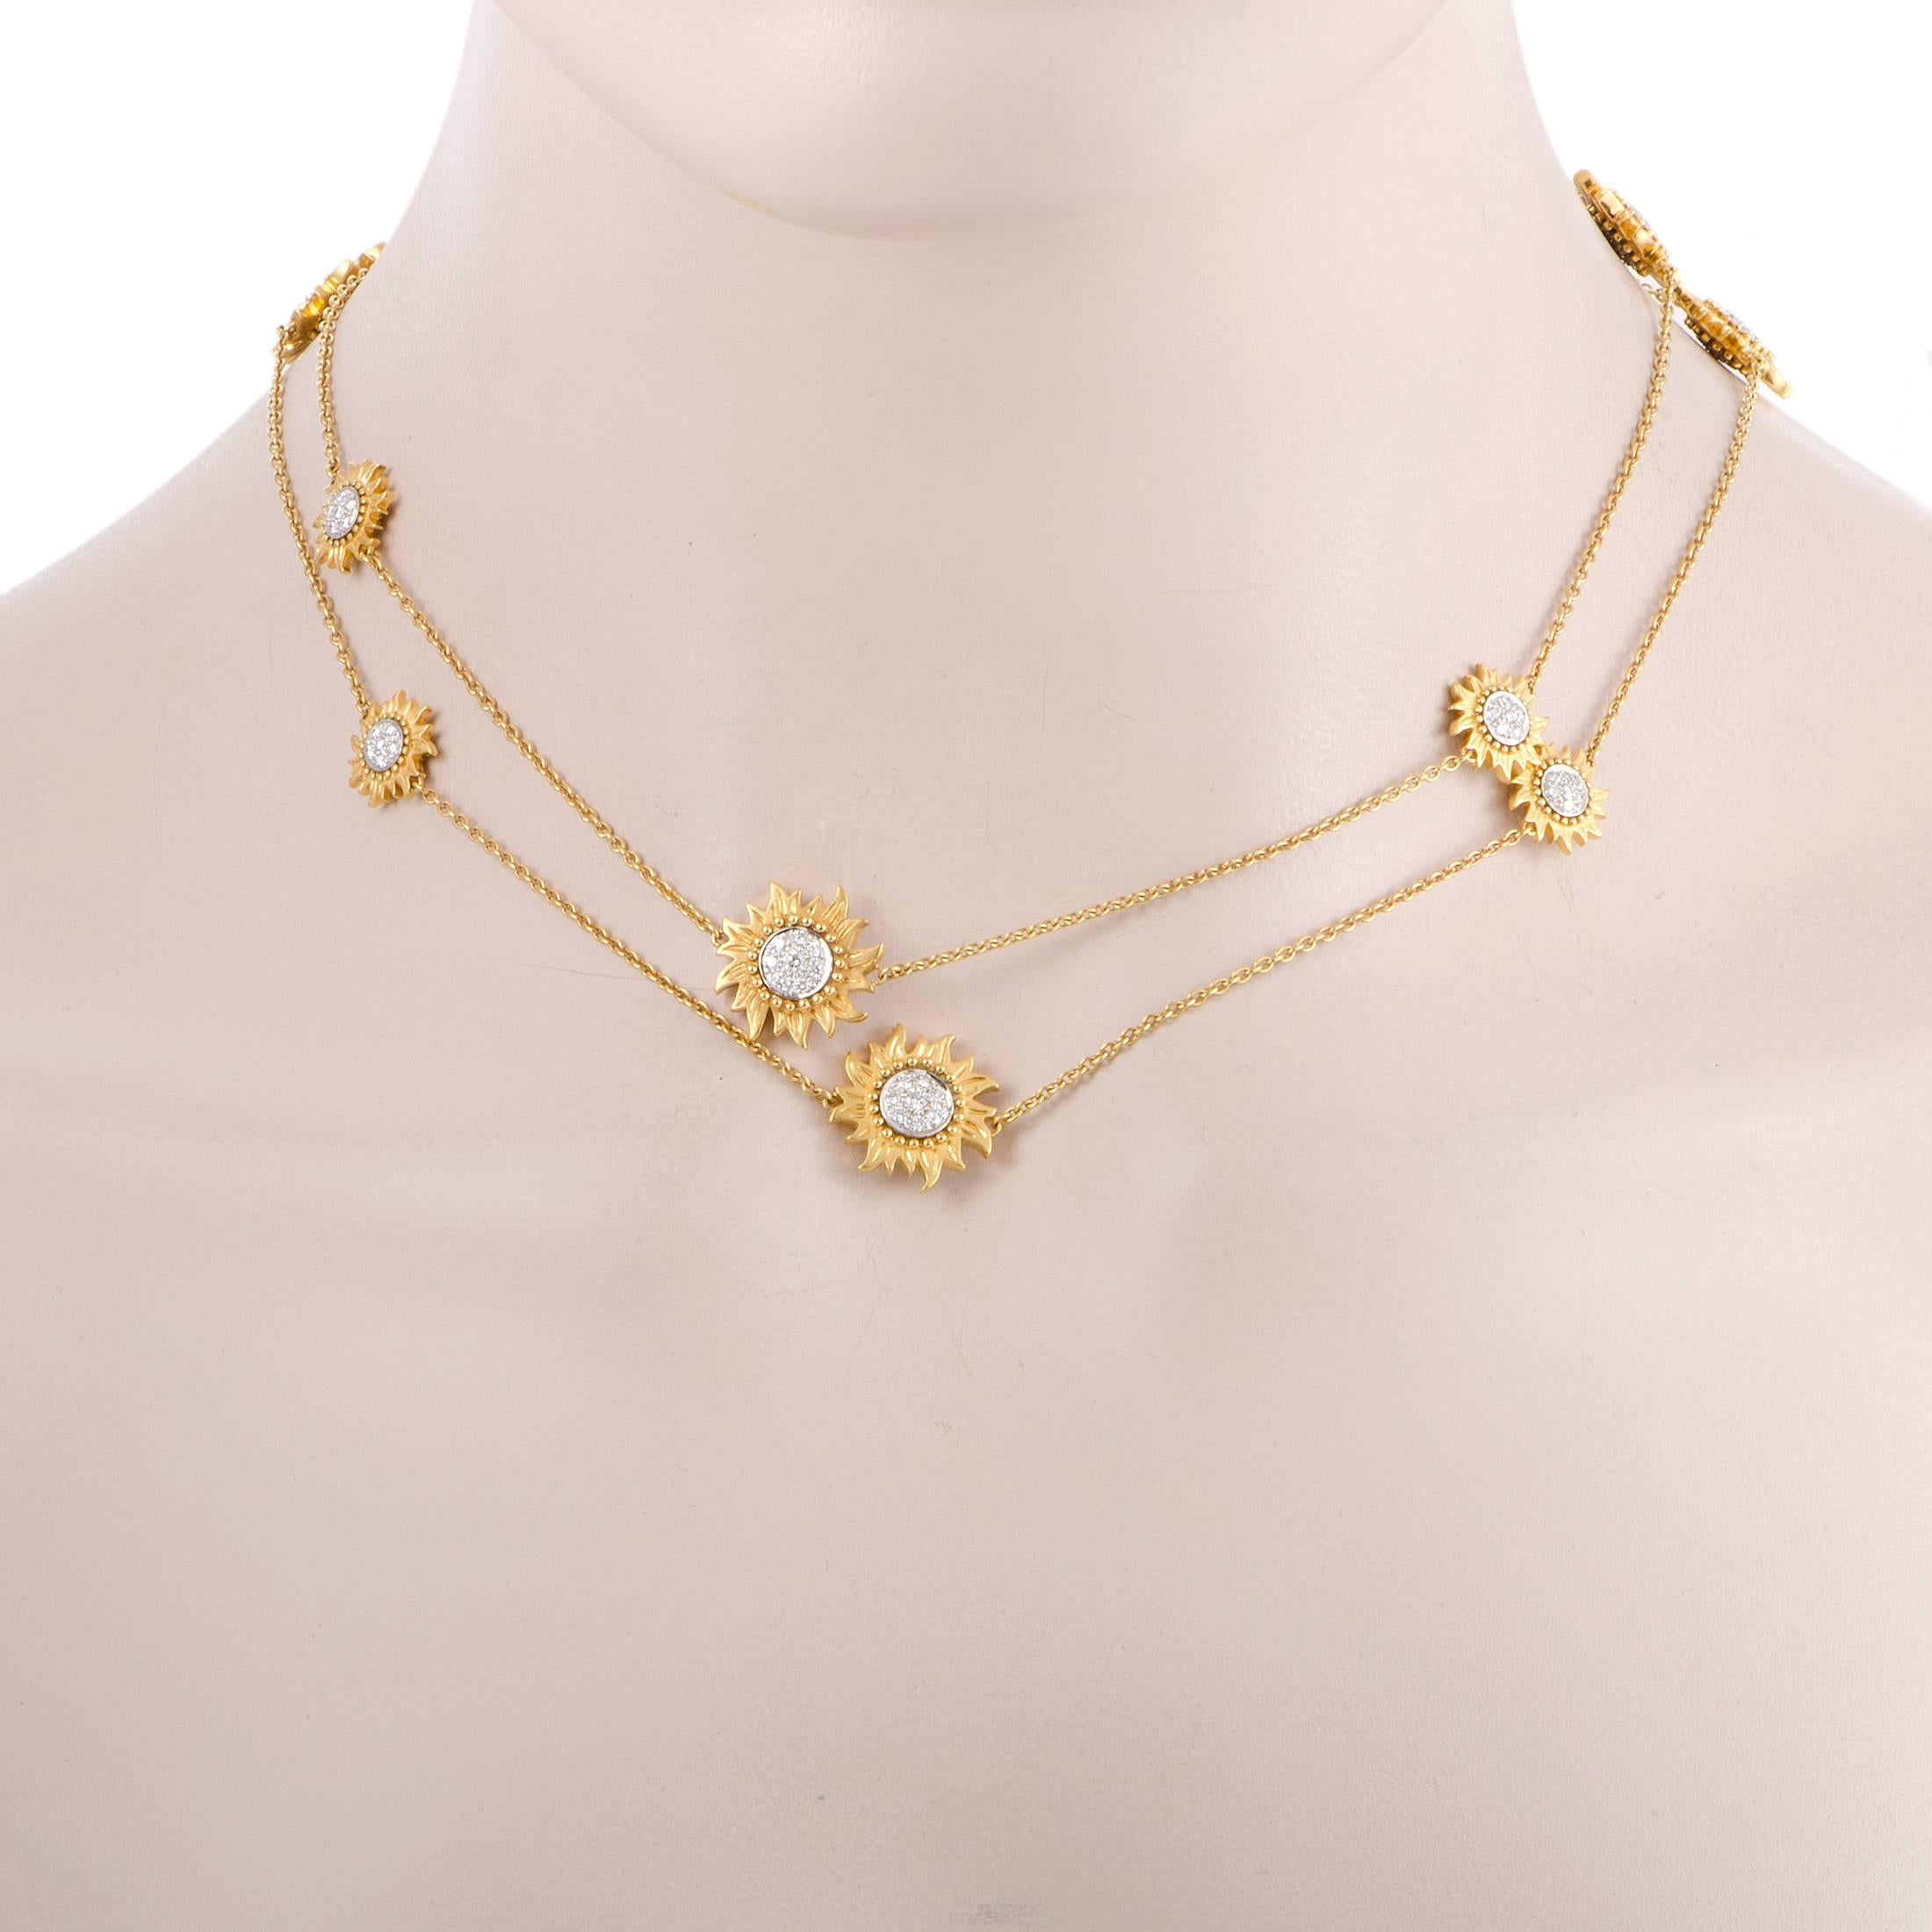 Add flower power to your ensemble with this gorgeous Sol y Sombra necklace bedecked with sunflowers. The necklace is accented with 2.5ct of diamonds and crafted in 18K yellow and white gold by Carrera y Carrera. If you’re wondering how to infuse